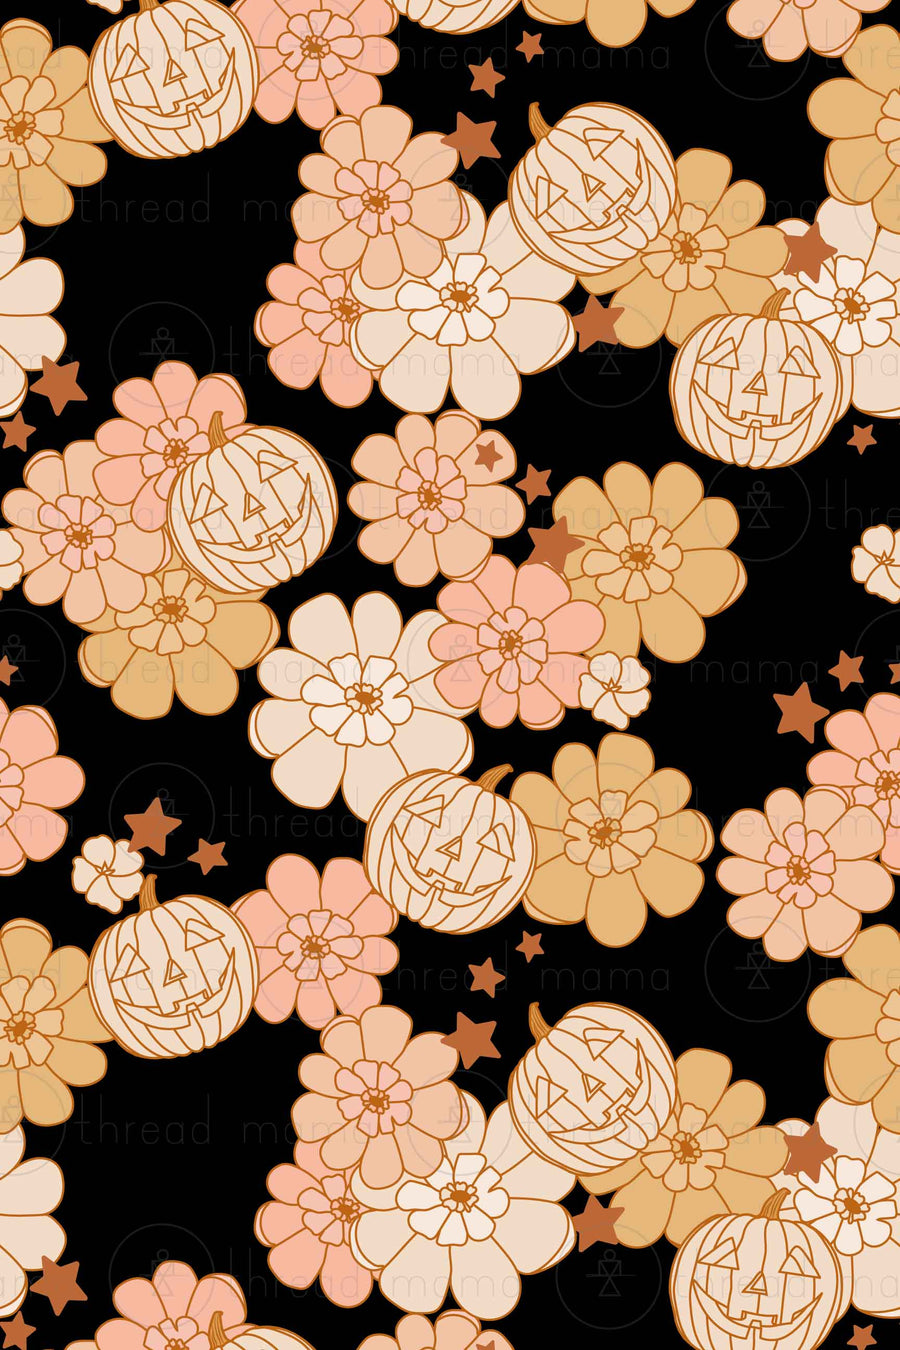 Repeating Pattern 122 (Seamless)